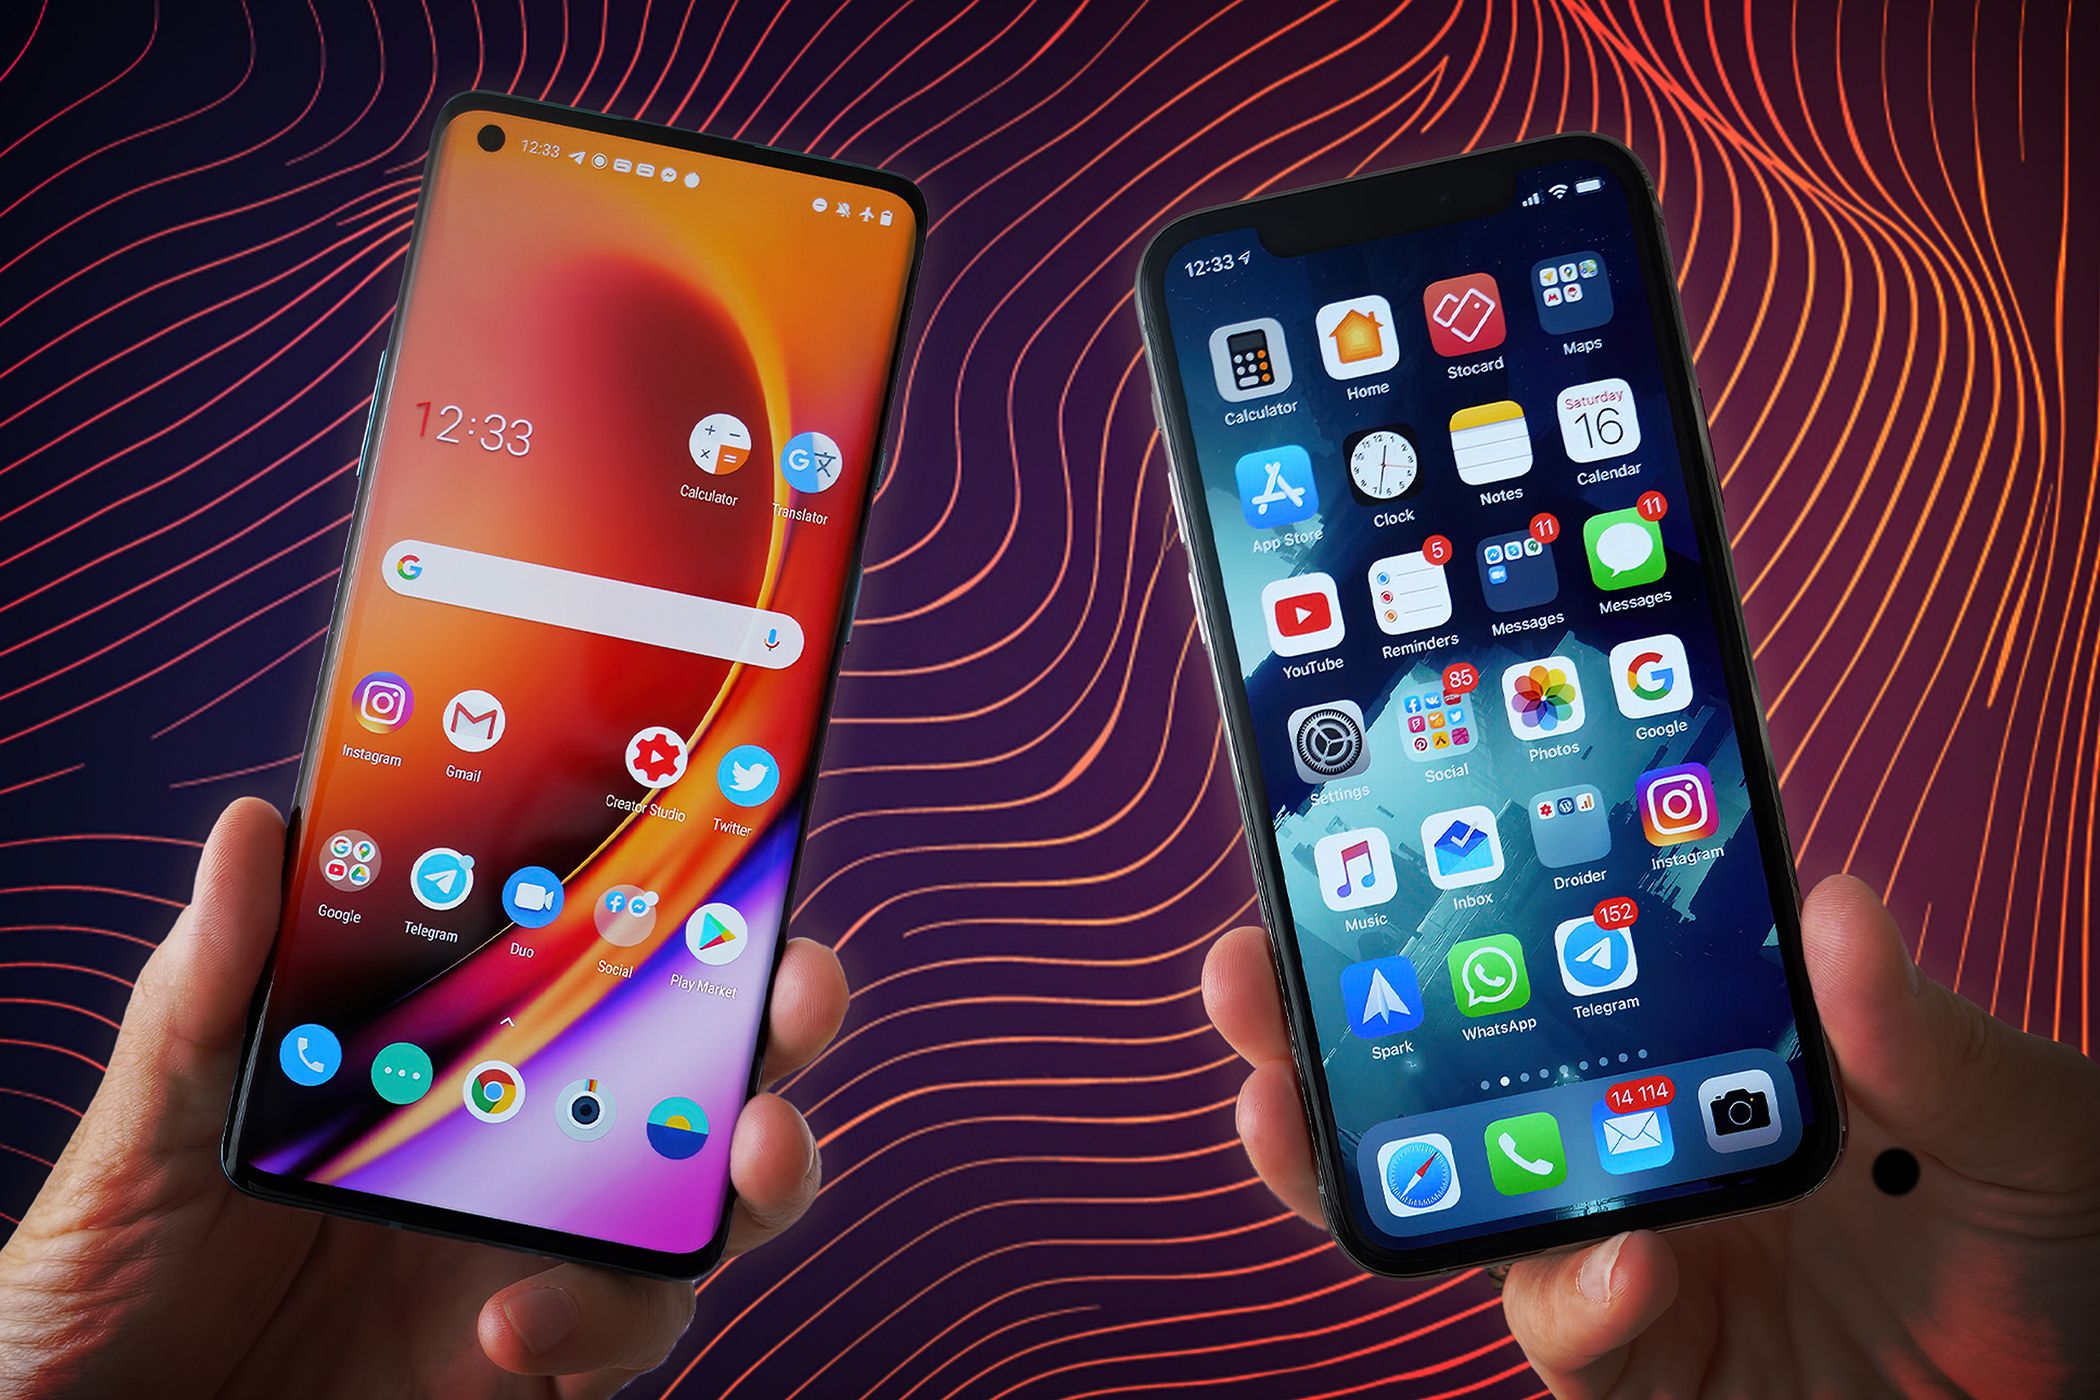 Hands holding an iPhone and a smartphone side by side, displaying different home screens, set against a vibrant, wavy background.